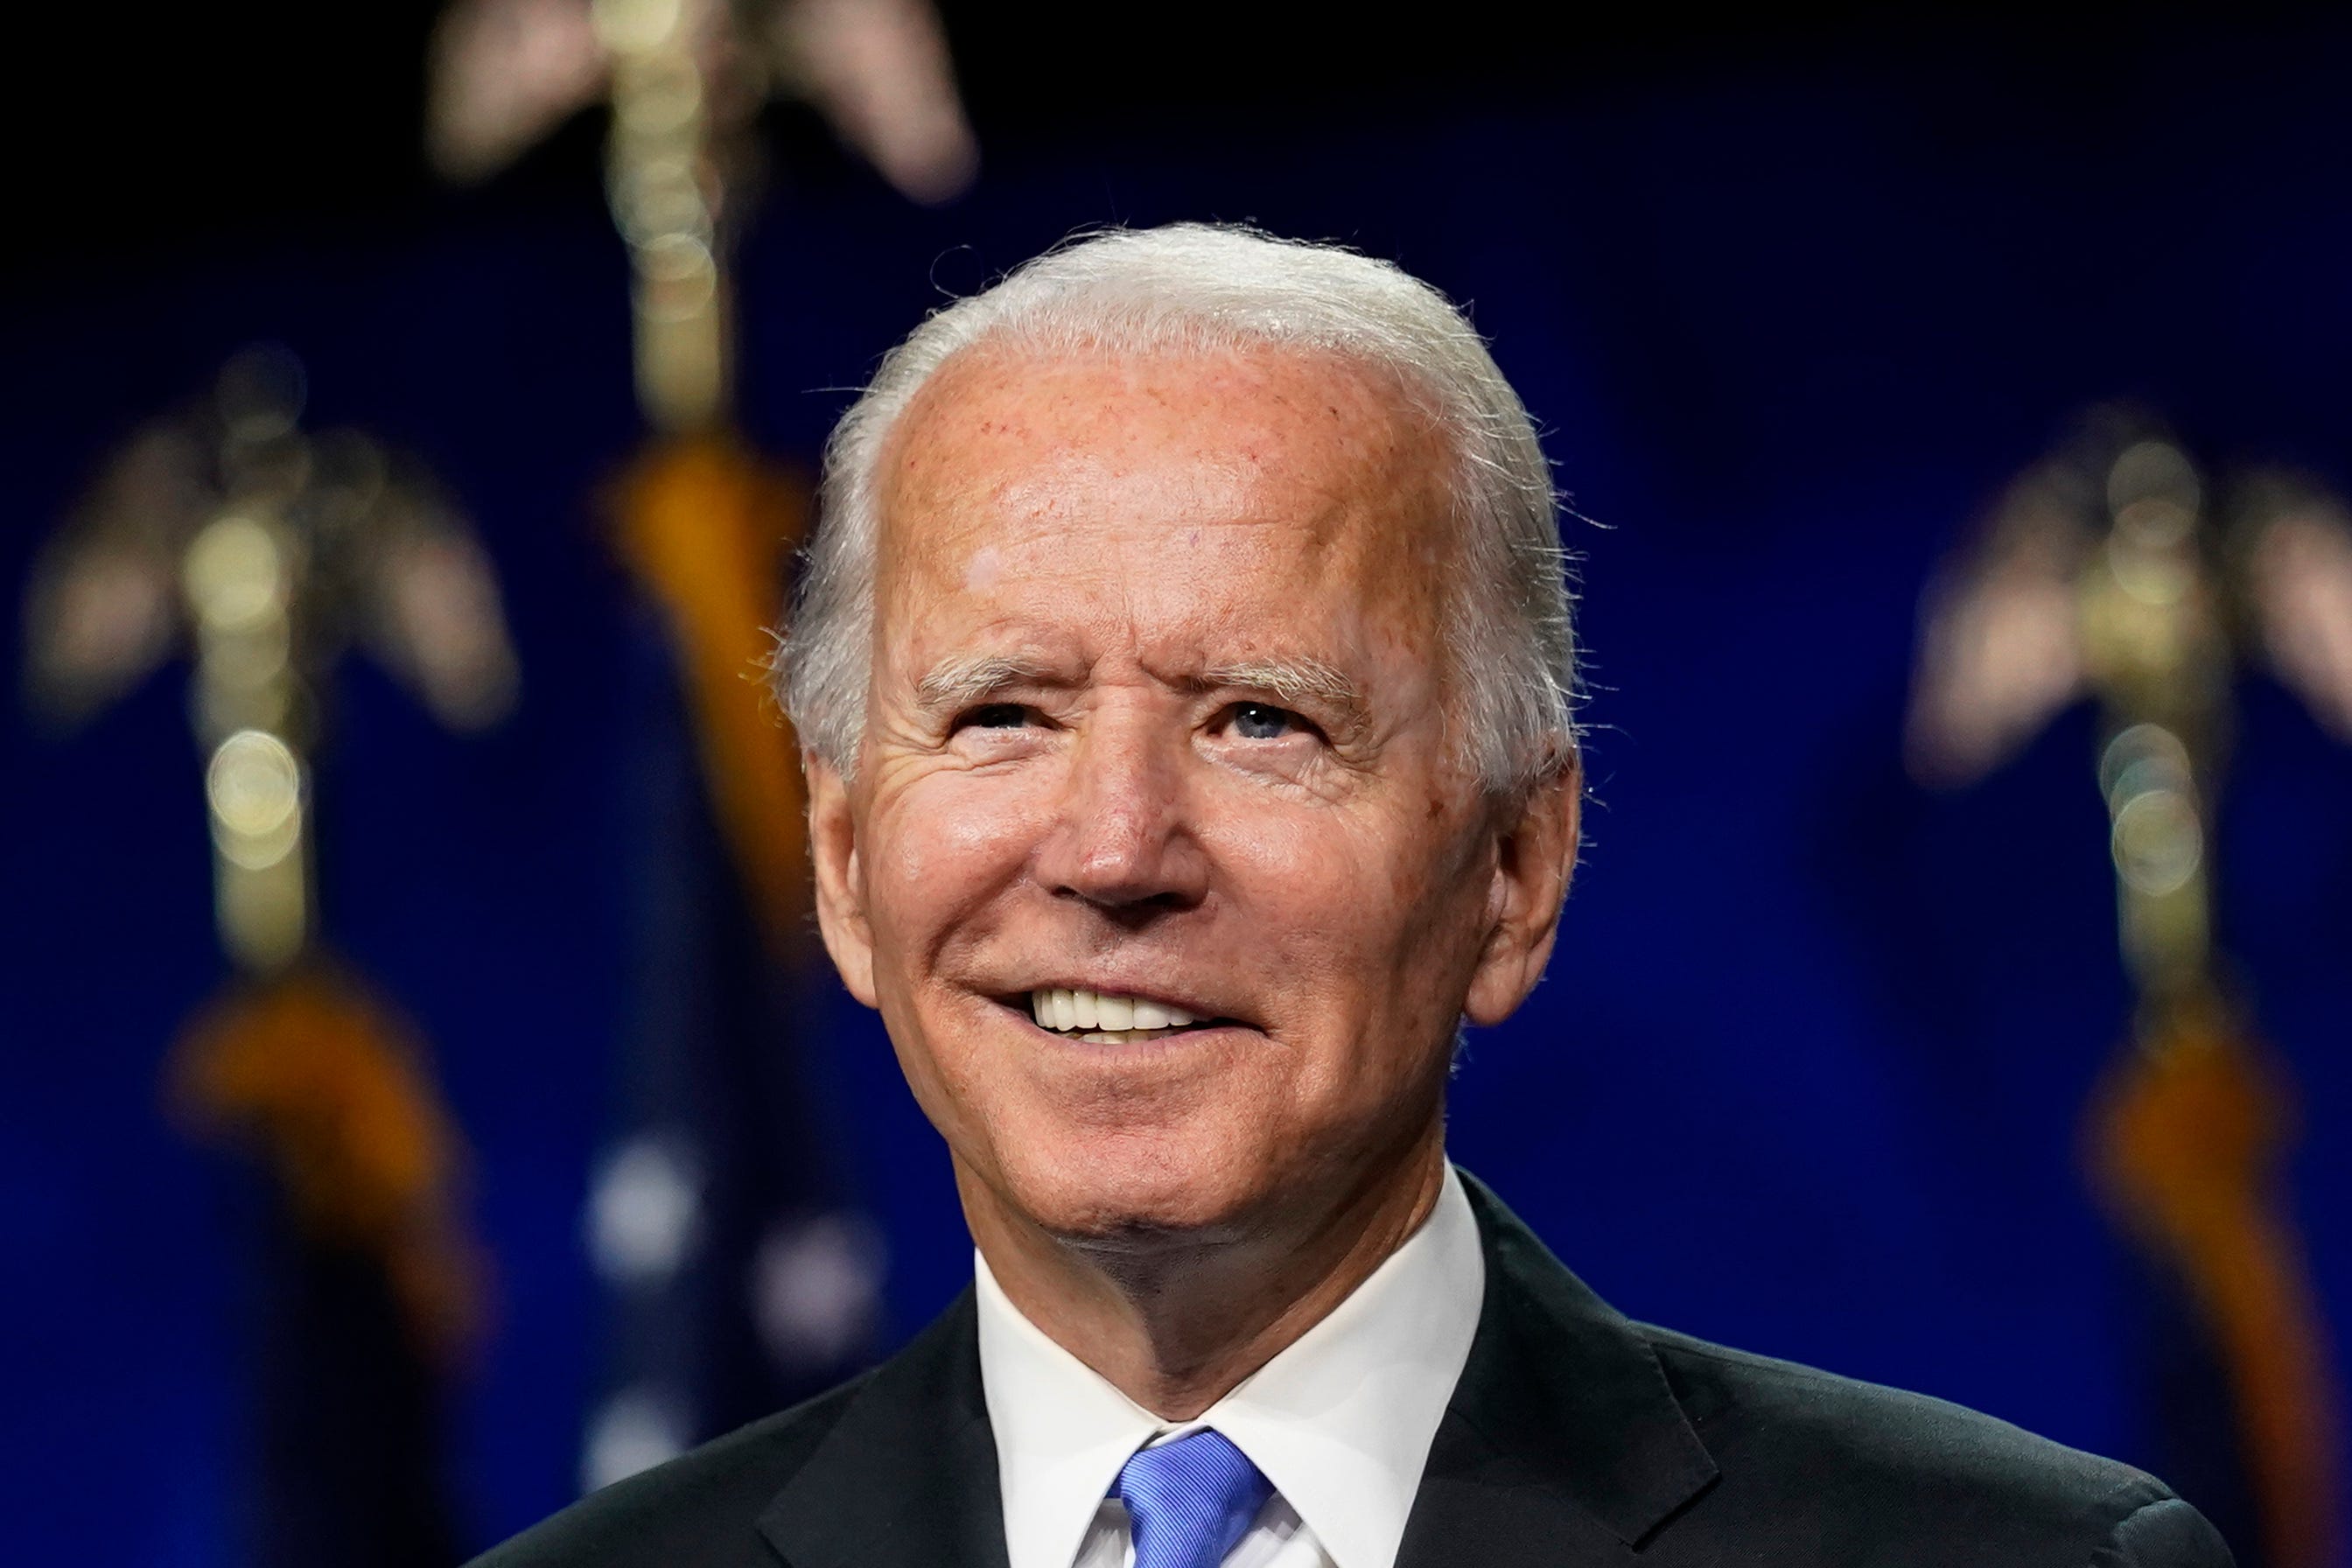 joe biden delegates won - Biden|President|Joe|States|Delaware|Obama|Vice|Senate|Campaign|Election|Time|Administration|House|Law|People|Years|Family|Year|Trump|School|University|Senator|Office|Party|Country|Committee|Act|War|Days|Climate|Hunter|Health|America|State|Day|Democrats|Americans|Documents|Care|Plan|United States|Vice President|White House|Joe Biden|Biden Administration|Democratic Party|Law School|Presidential Election|President Joe Biden|Executive Orders|Foreign Relations Committee|Presidential Campaign|Second Term|47Th Vice President|Syracuse University|Climate Change|Hillary Clinton|Last Year|Barack Obama|Joseph Robinette Biden|U.S. Senator|Health Care|U.S. Senate|Donald Trump|President Trump|President Biden|Federal Register|Judiciary Committee|Presidential Nomination|Presidential Medal